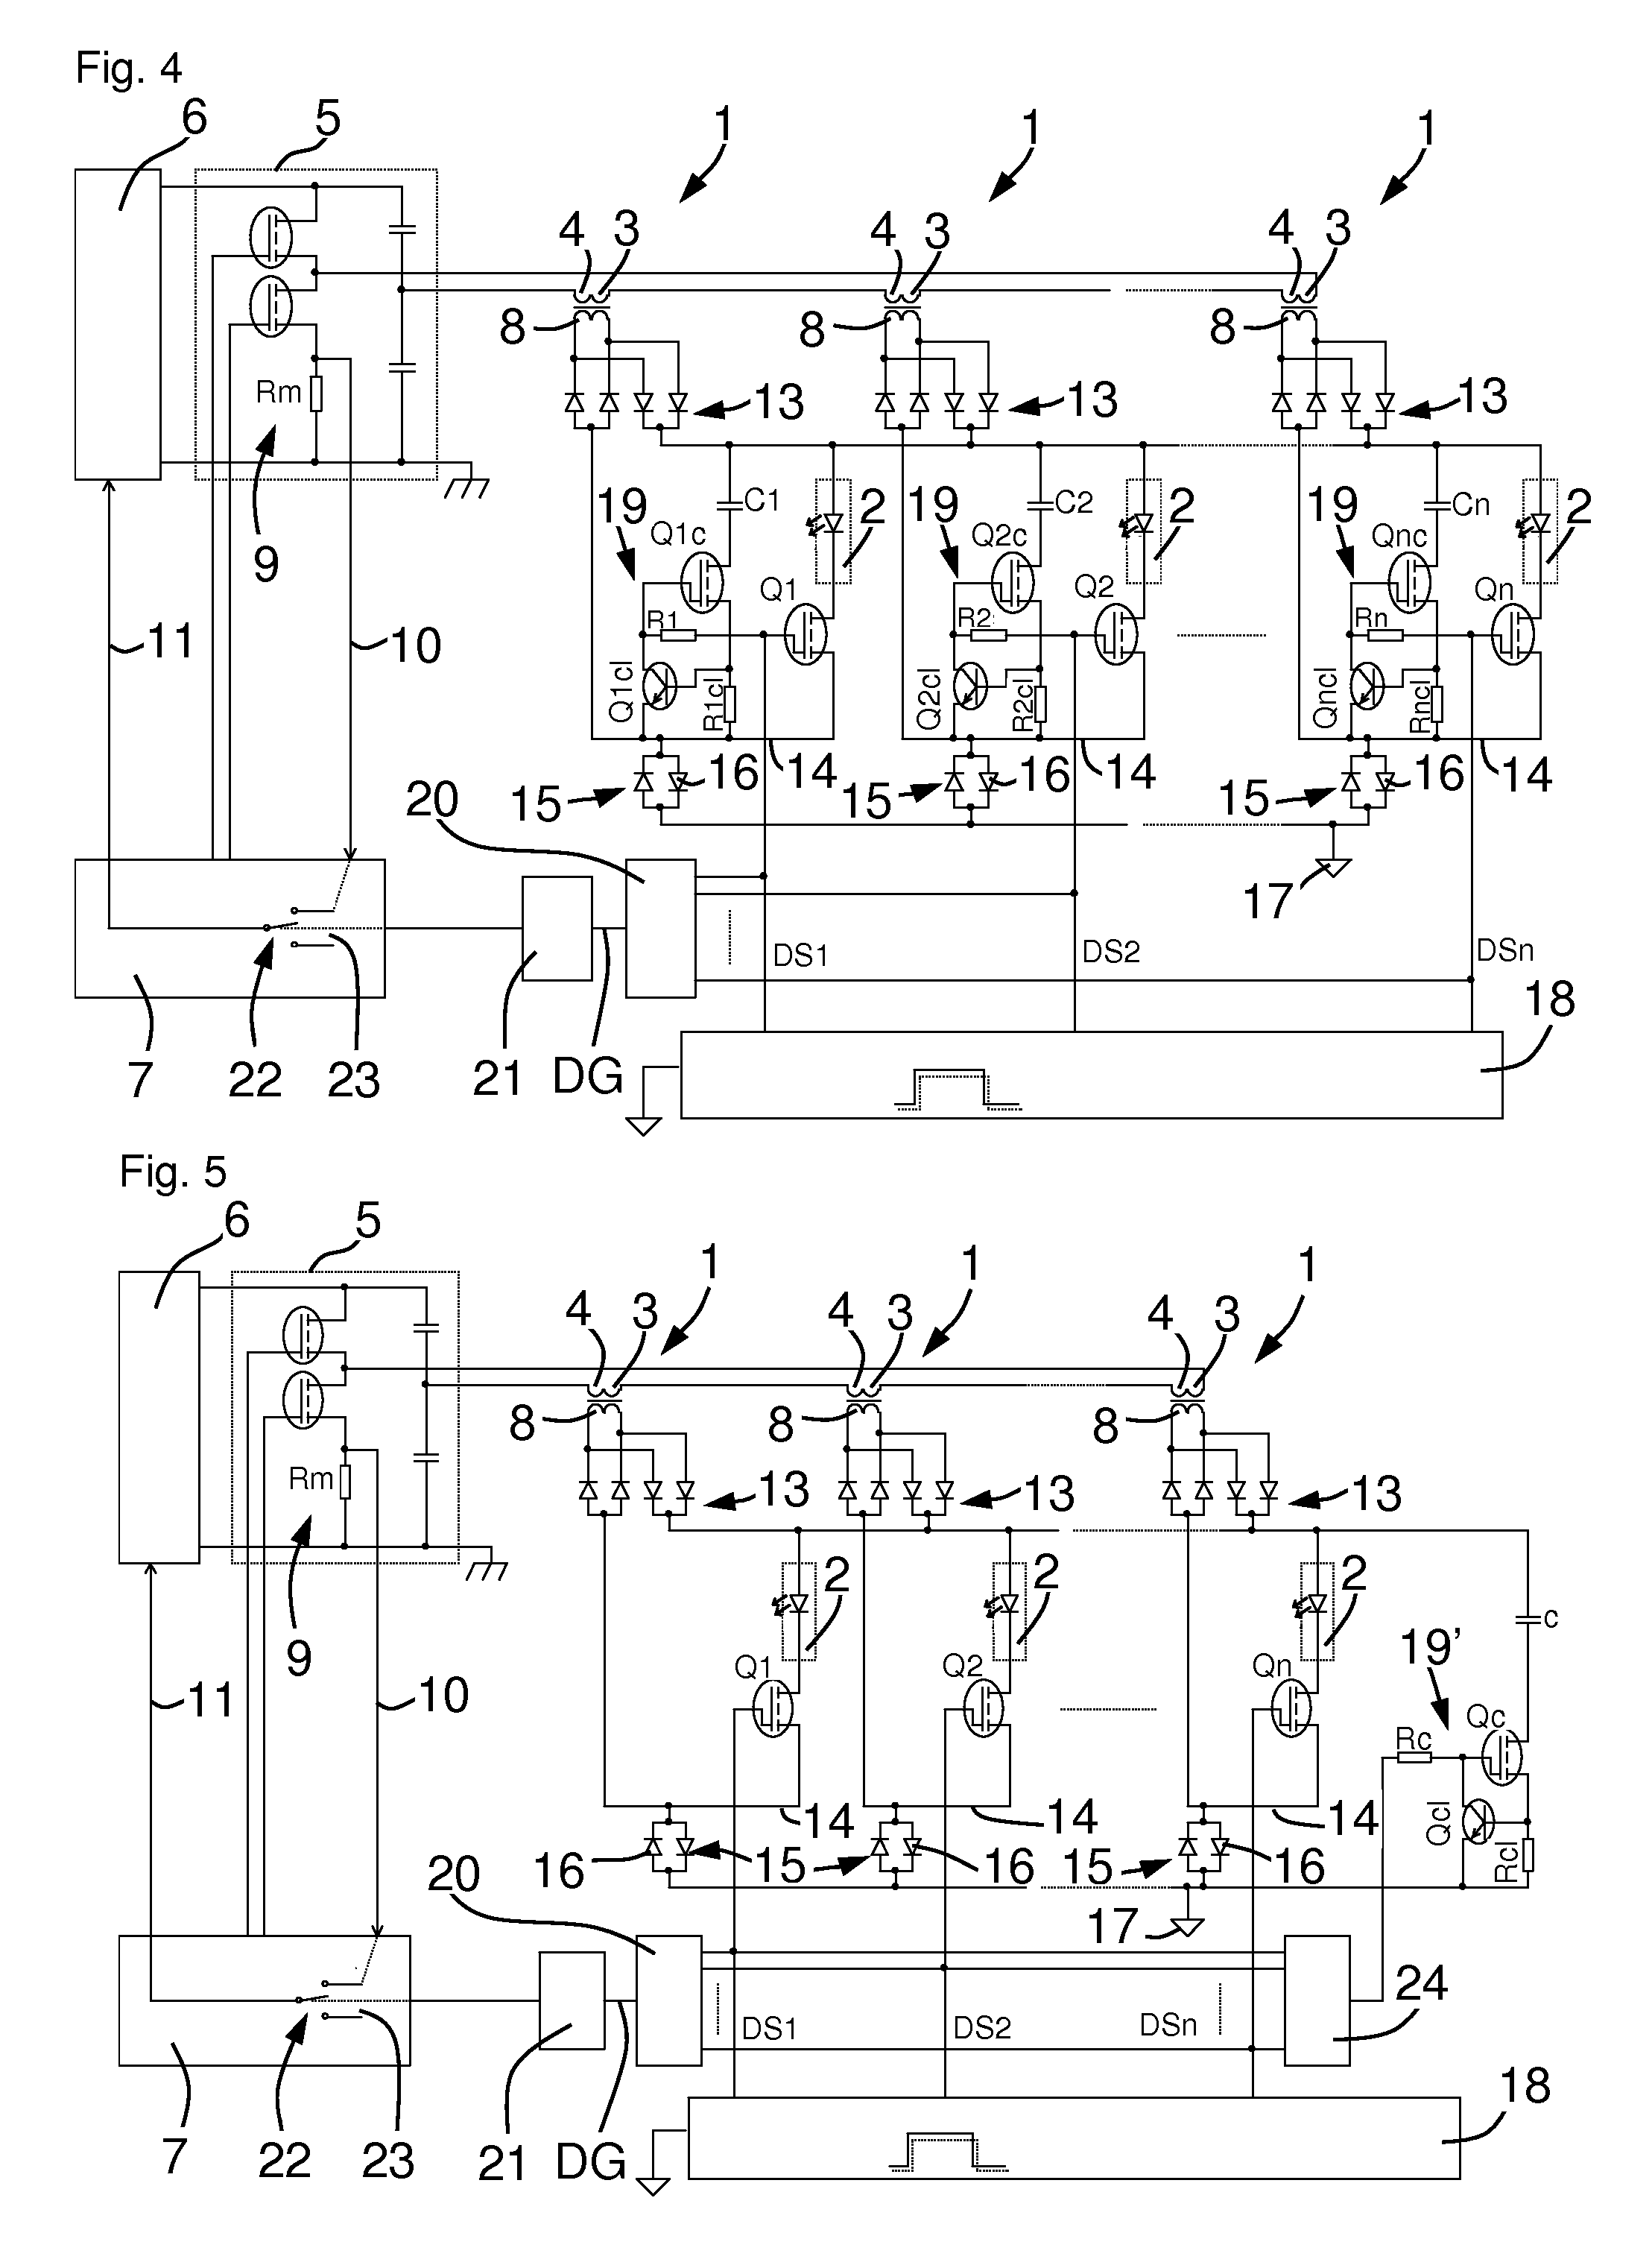 Control circuit for LED backlighting